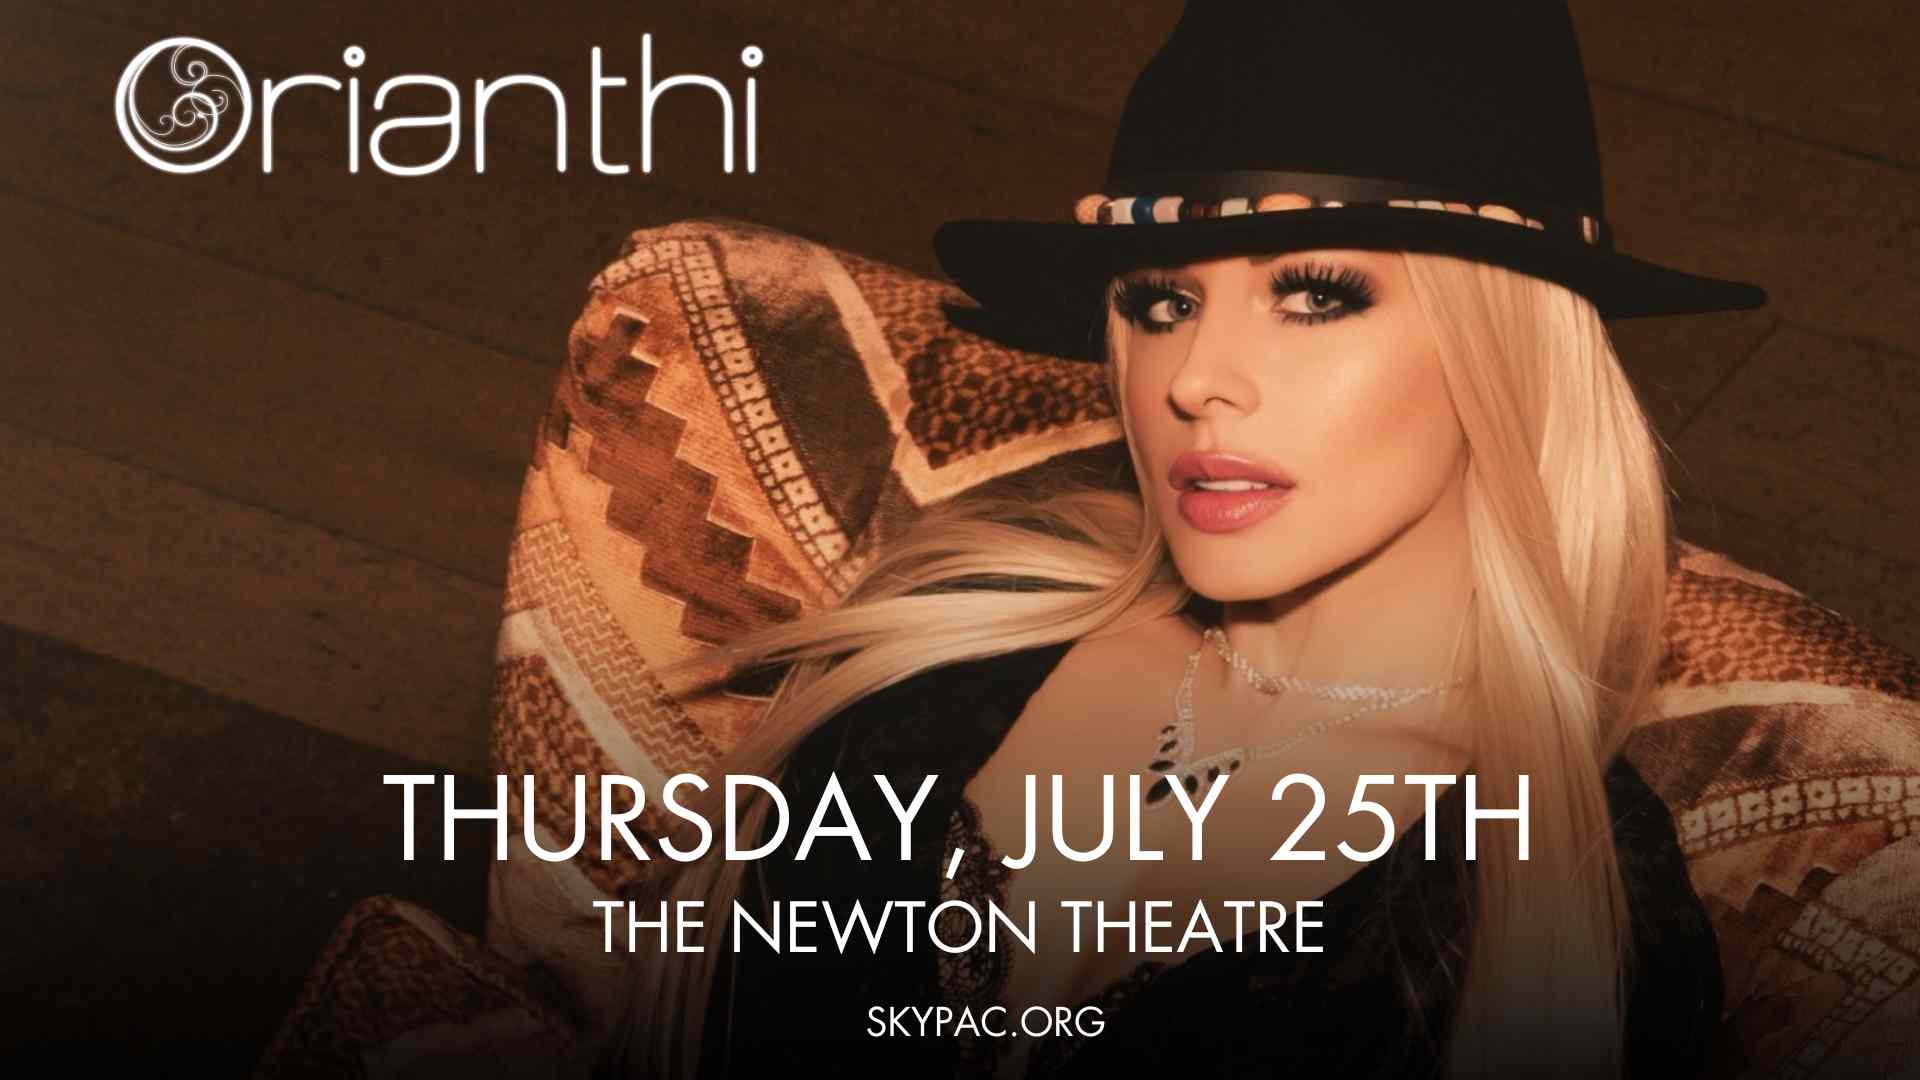 Orianthi comes to The Newton Theatre on Thursday, July 25th.